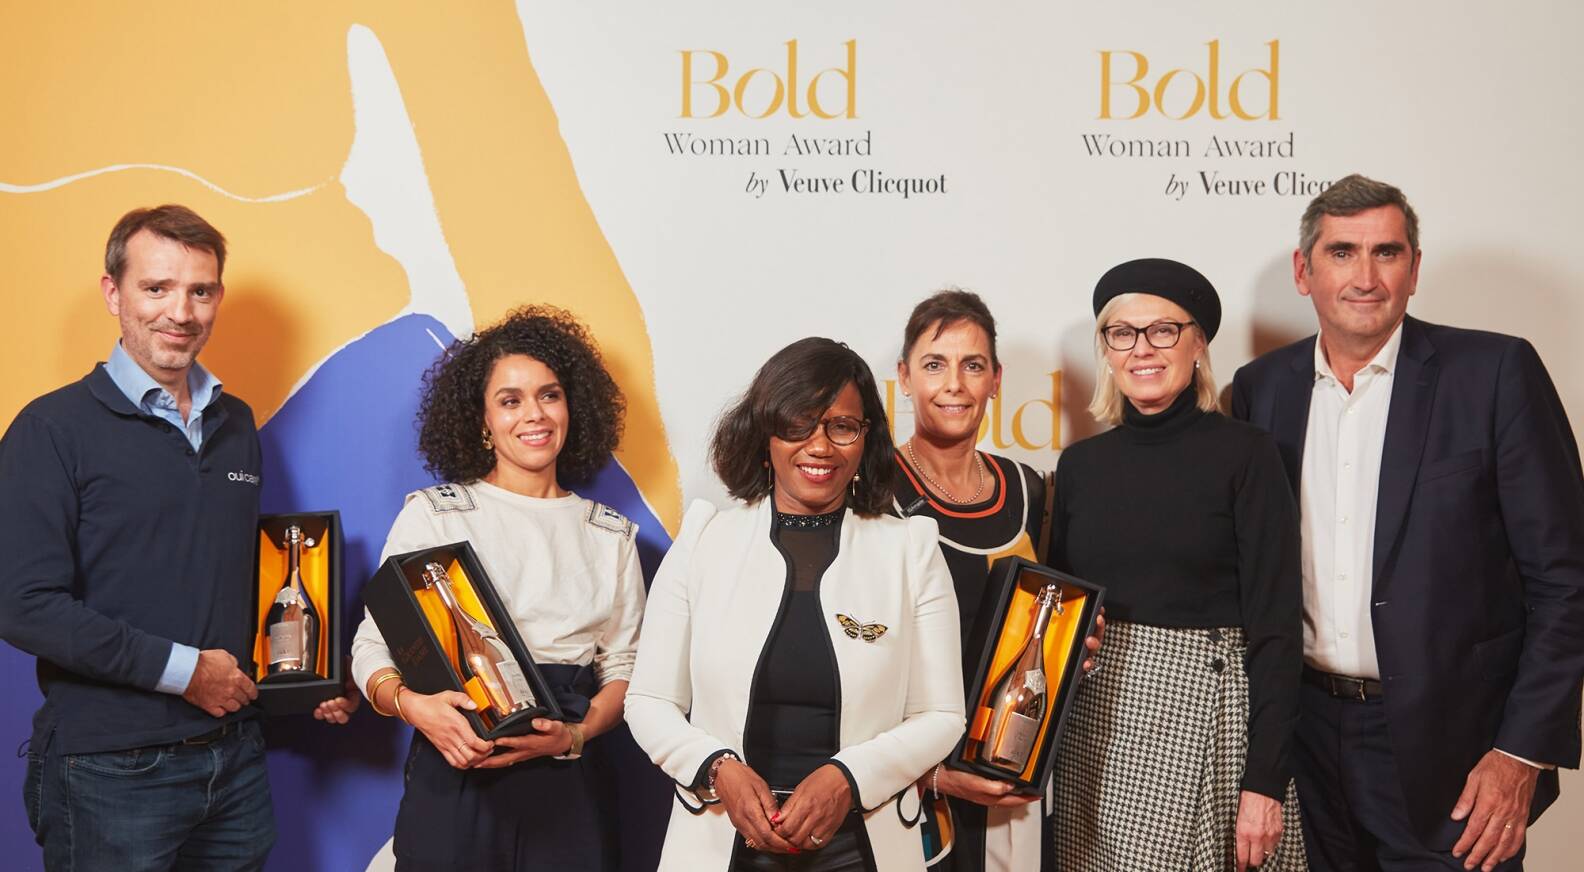 Veuve Clicquot Kicks Off Summer With Global Campaign – FAB News